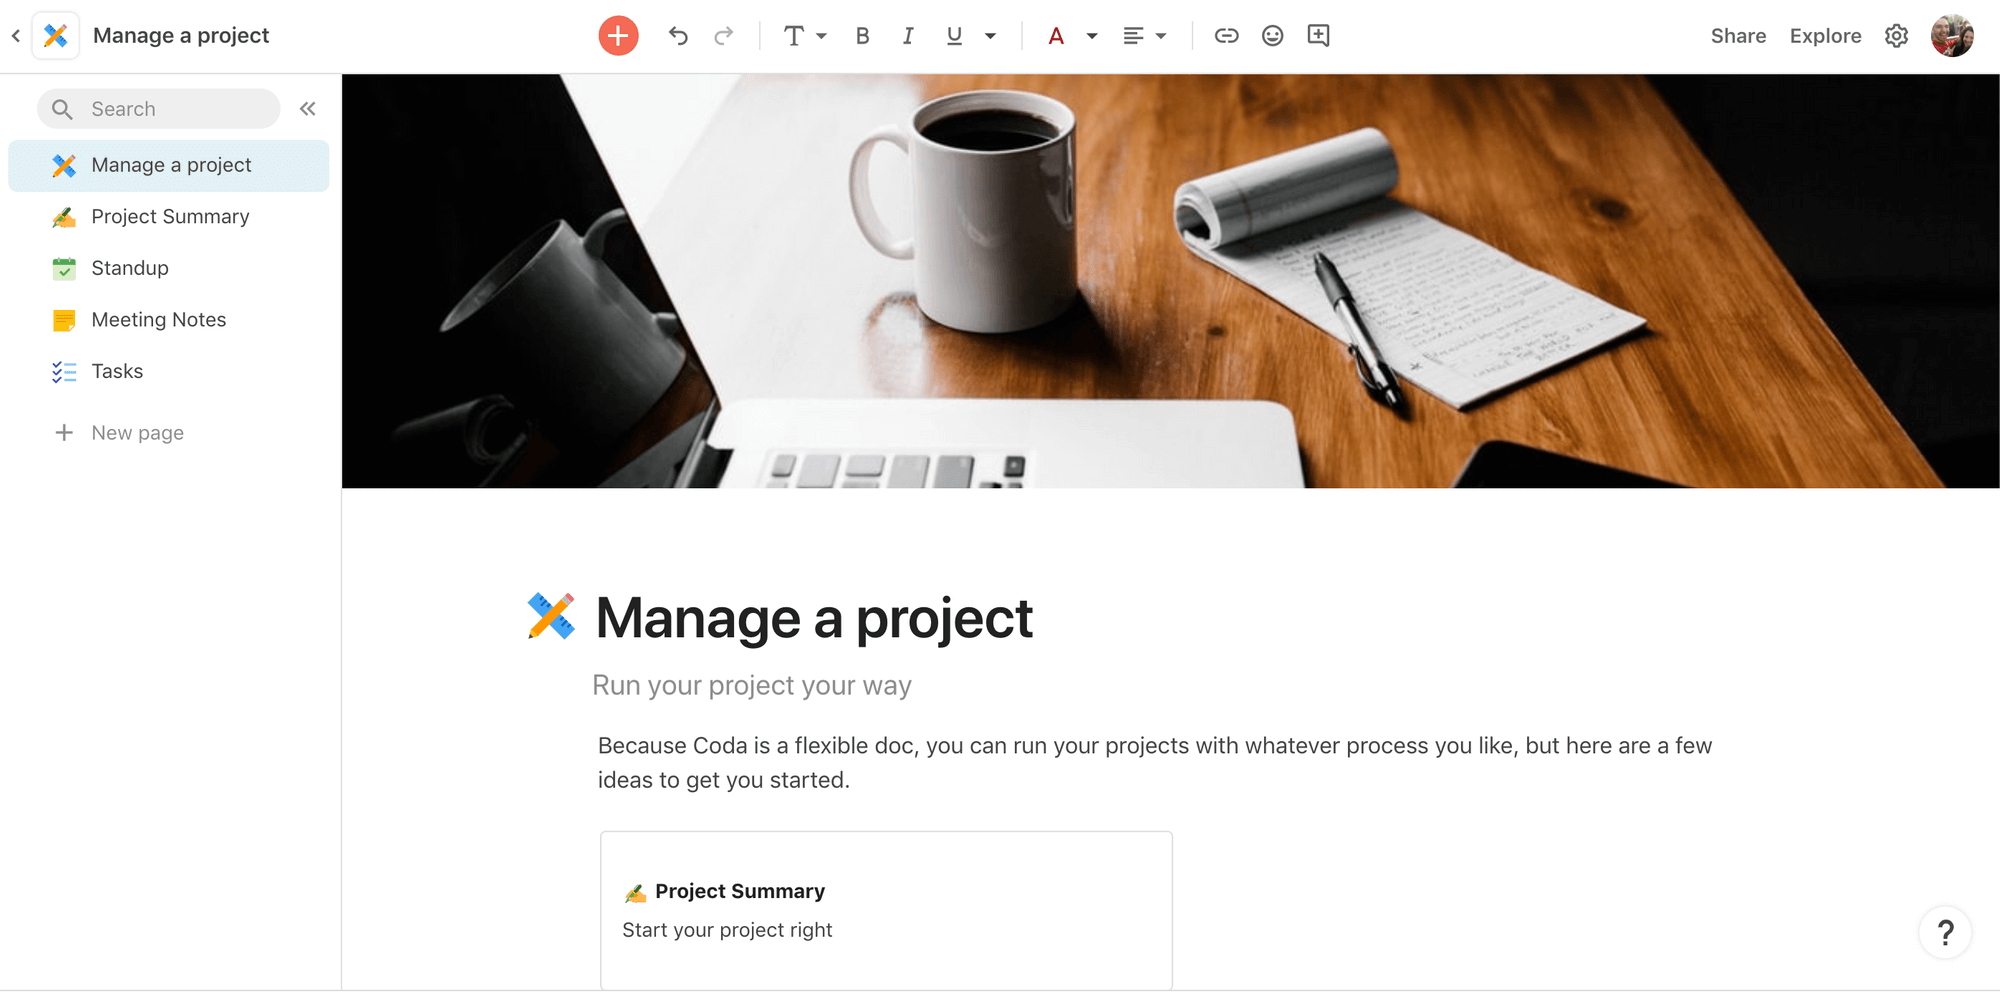 Coda Review: Improved Workflow and Docs Tool